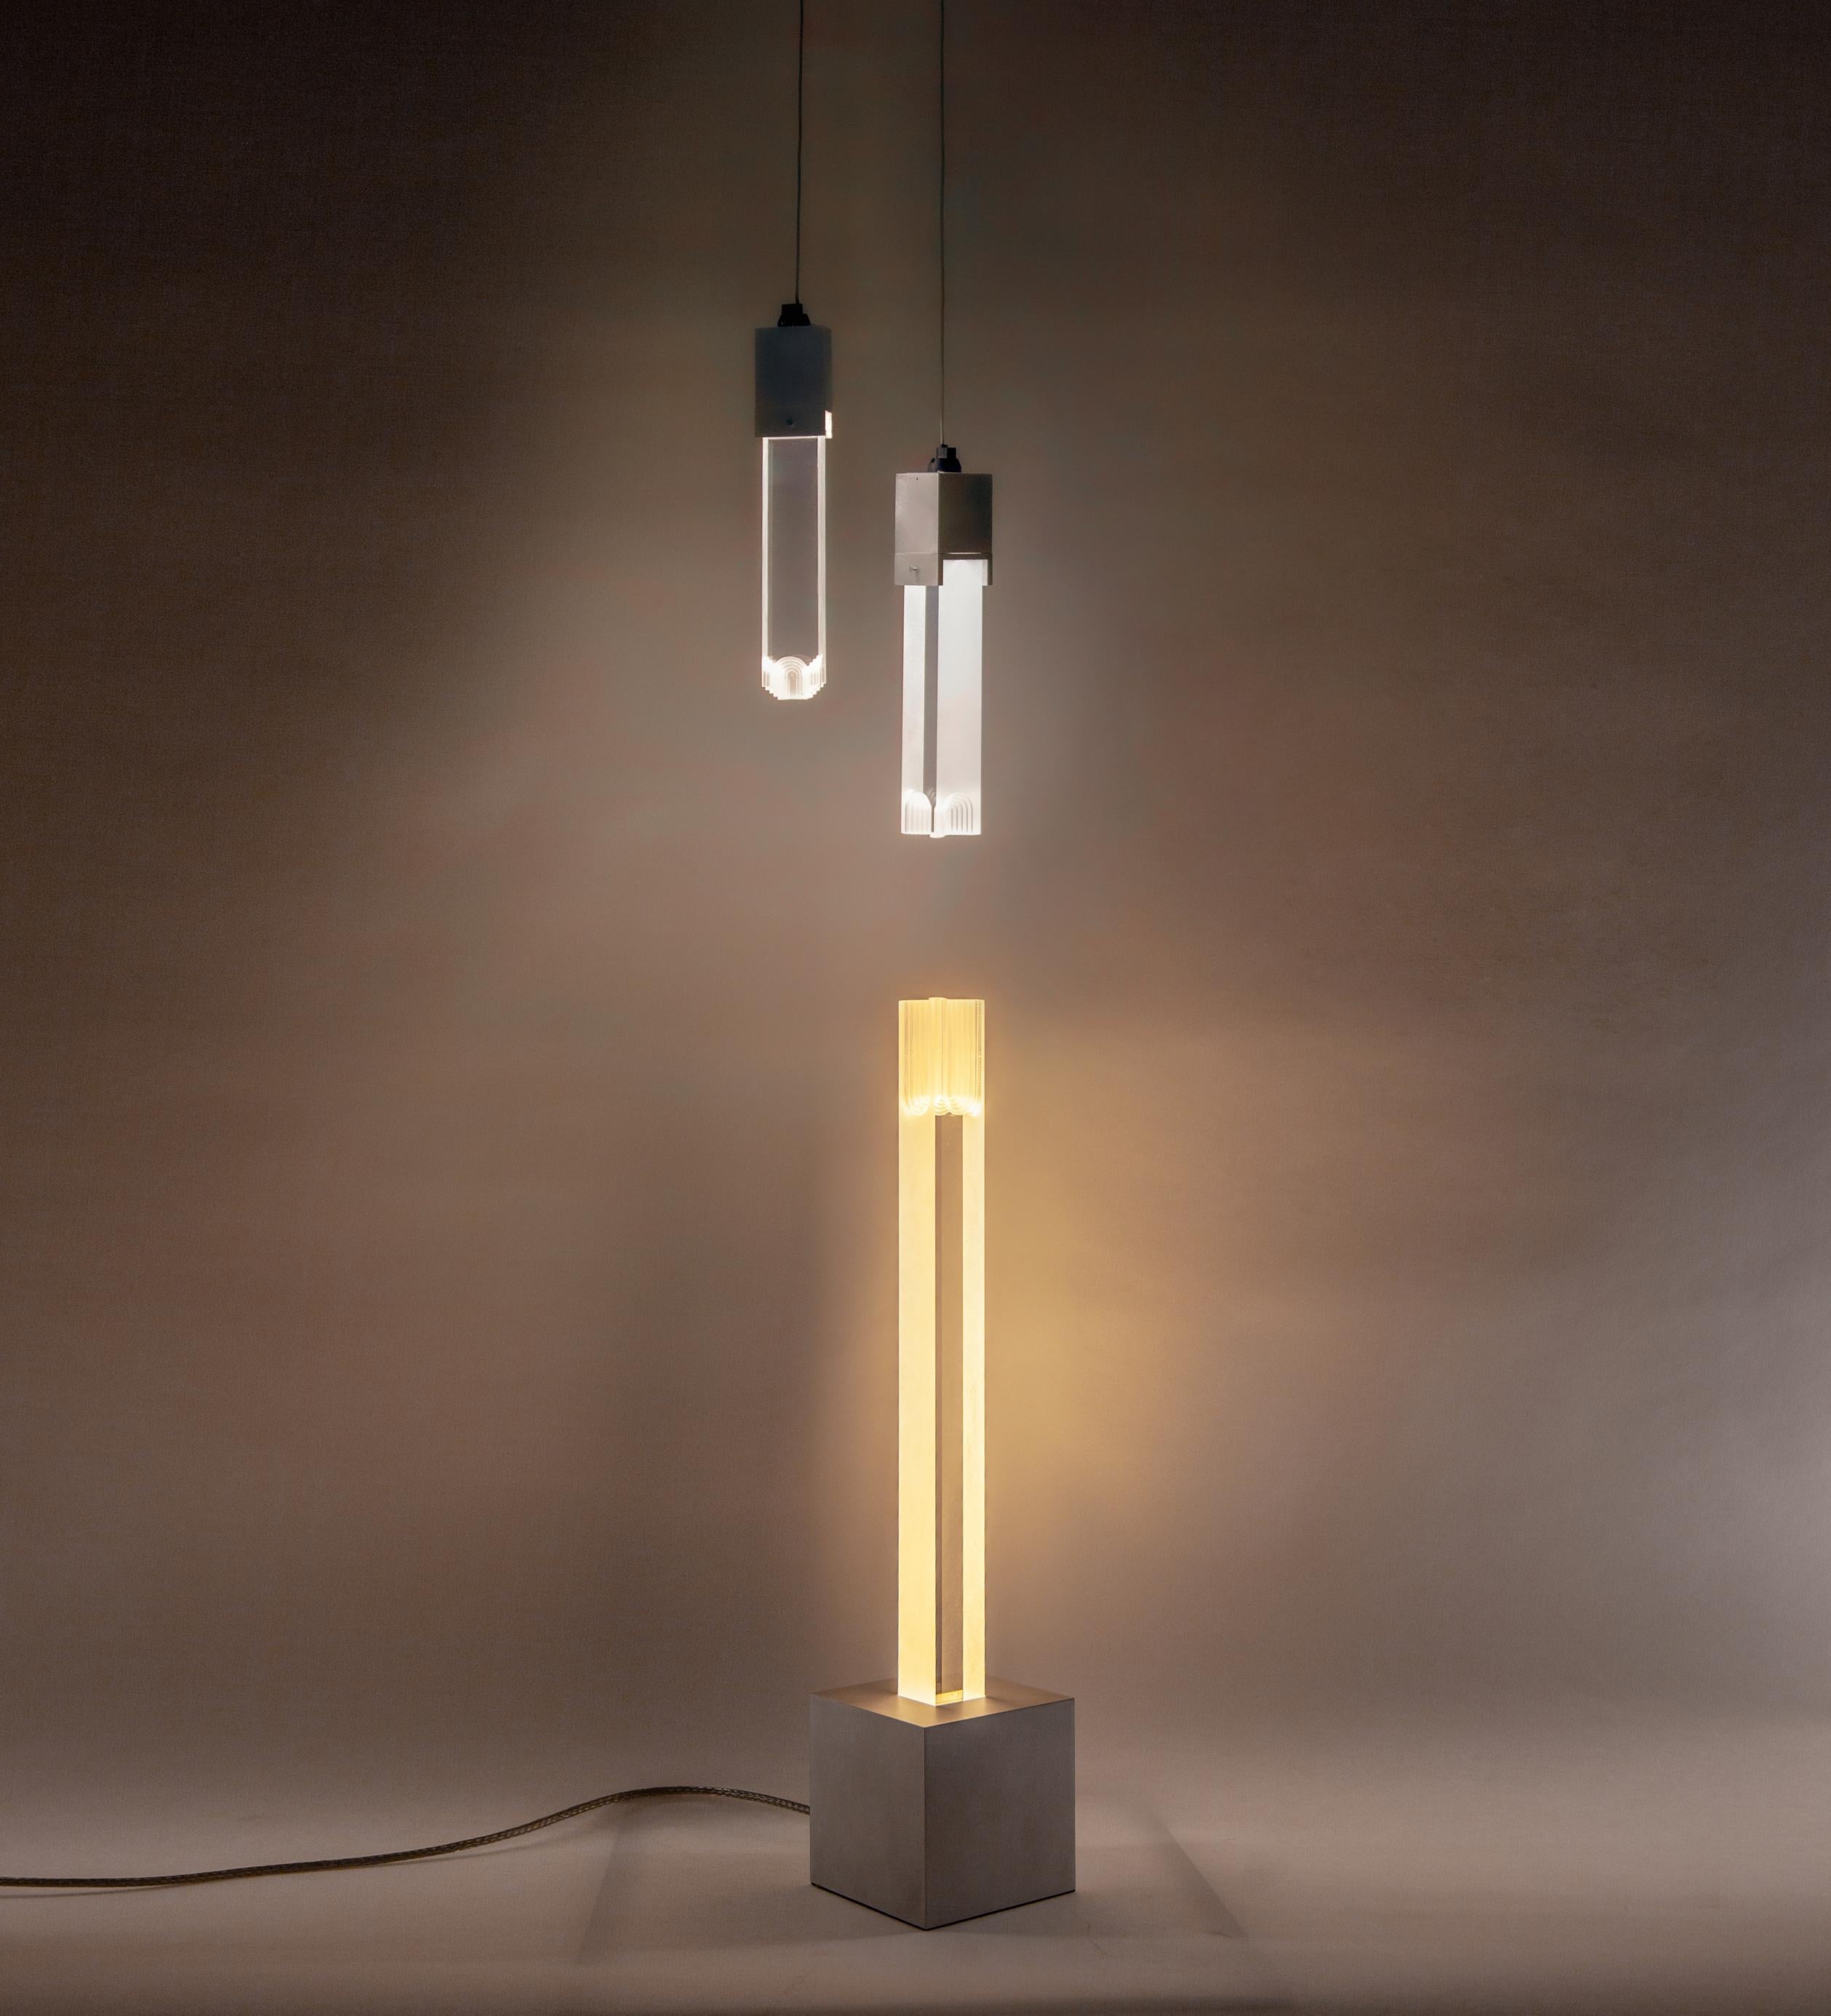 Modern 11°14”N Sculptural Pendant by Yonathan Moore, Represented by Tueste Factory 